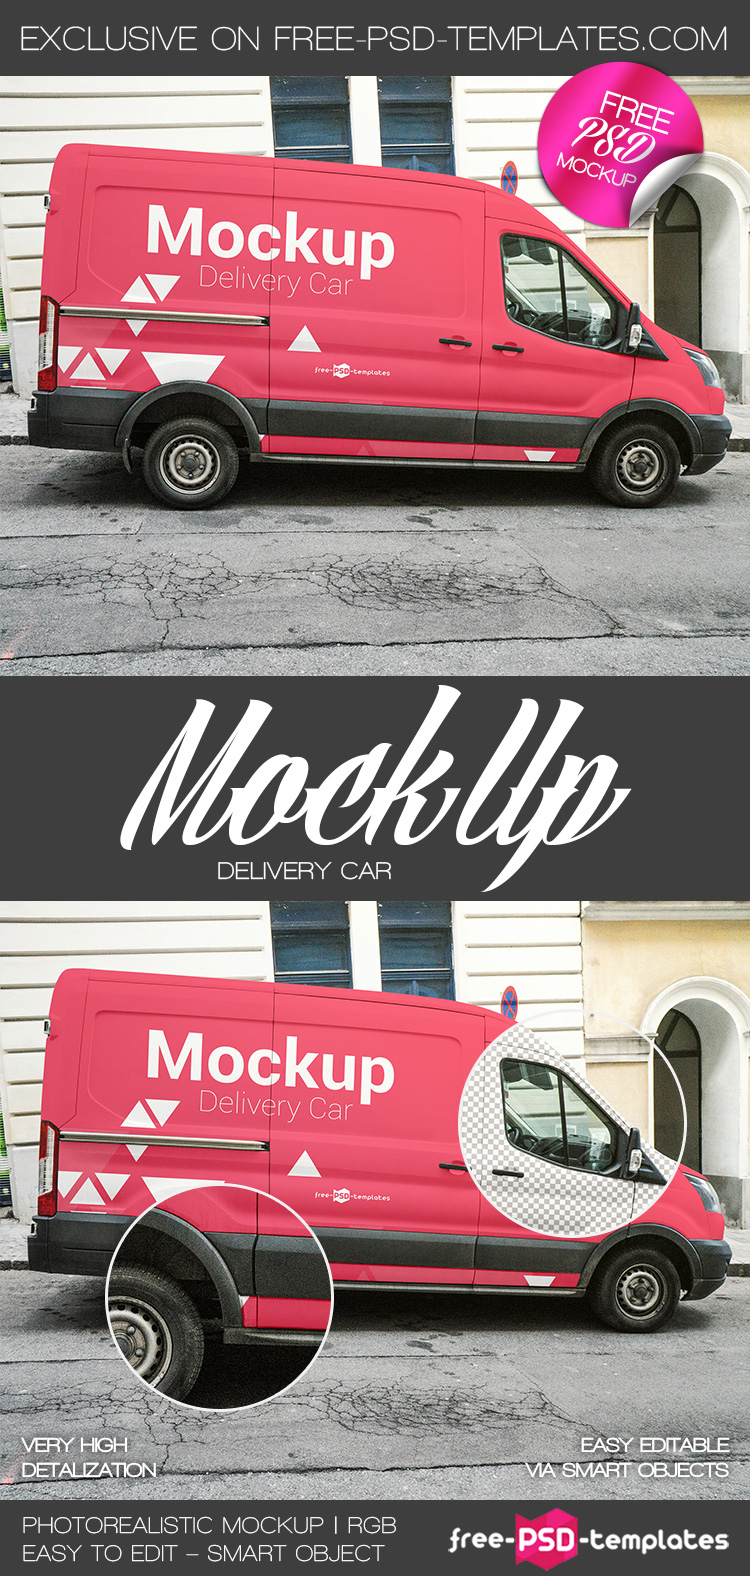 Download Free Delivery Car Mock-up in PSD | Free PSD Templates